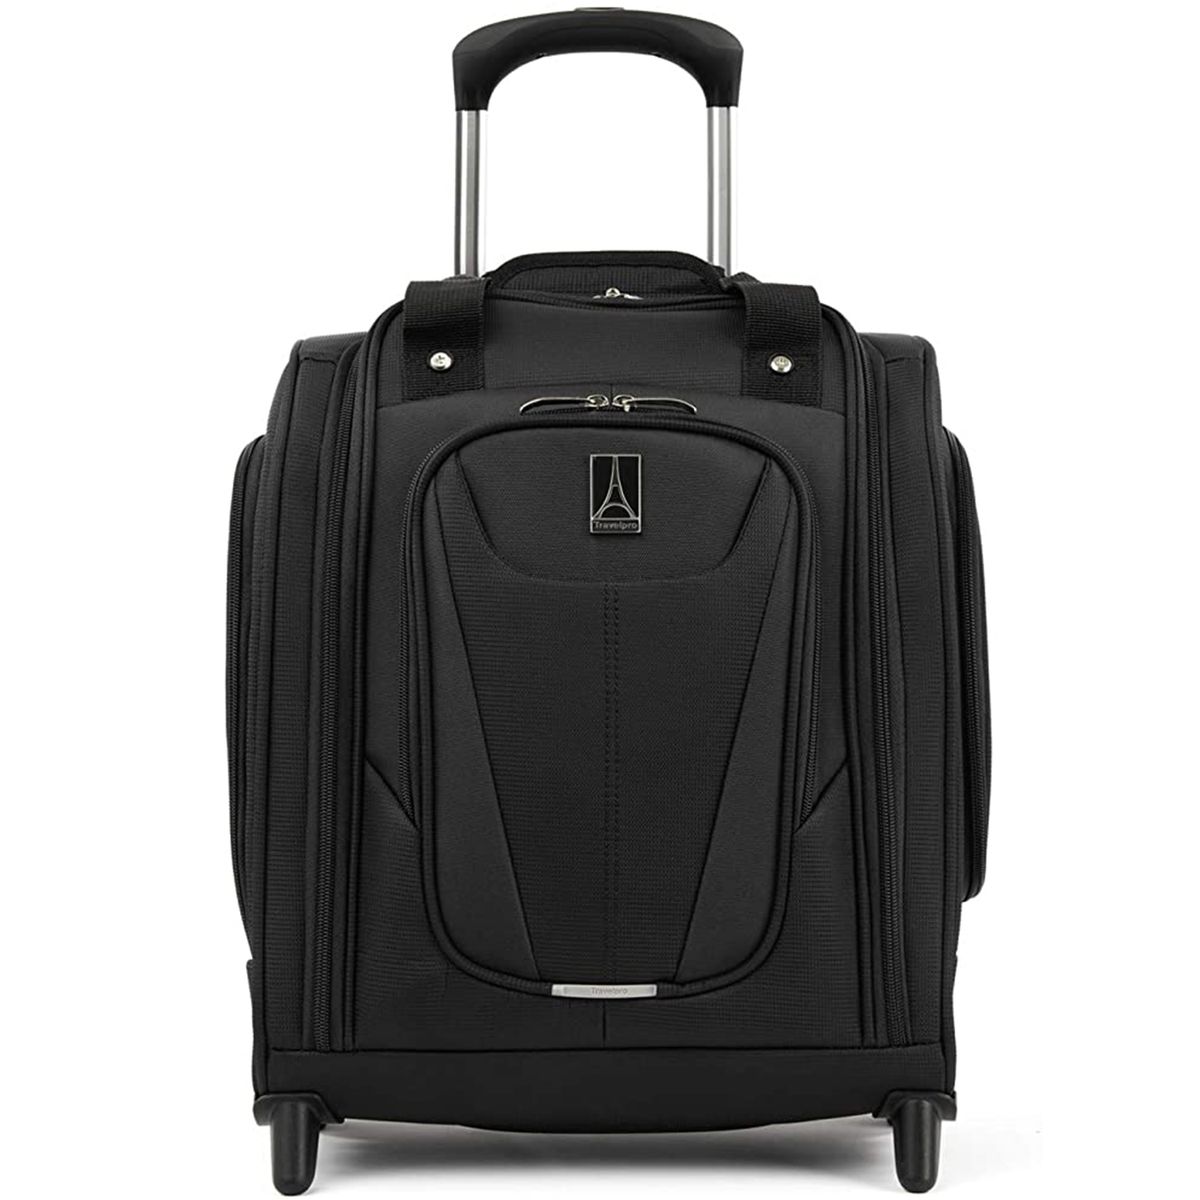 Travelpro Maxlite 5 Rolling Underseat Compact Carry-On Bag